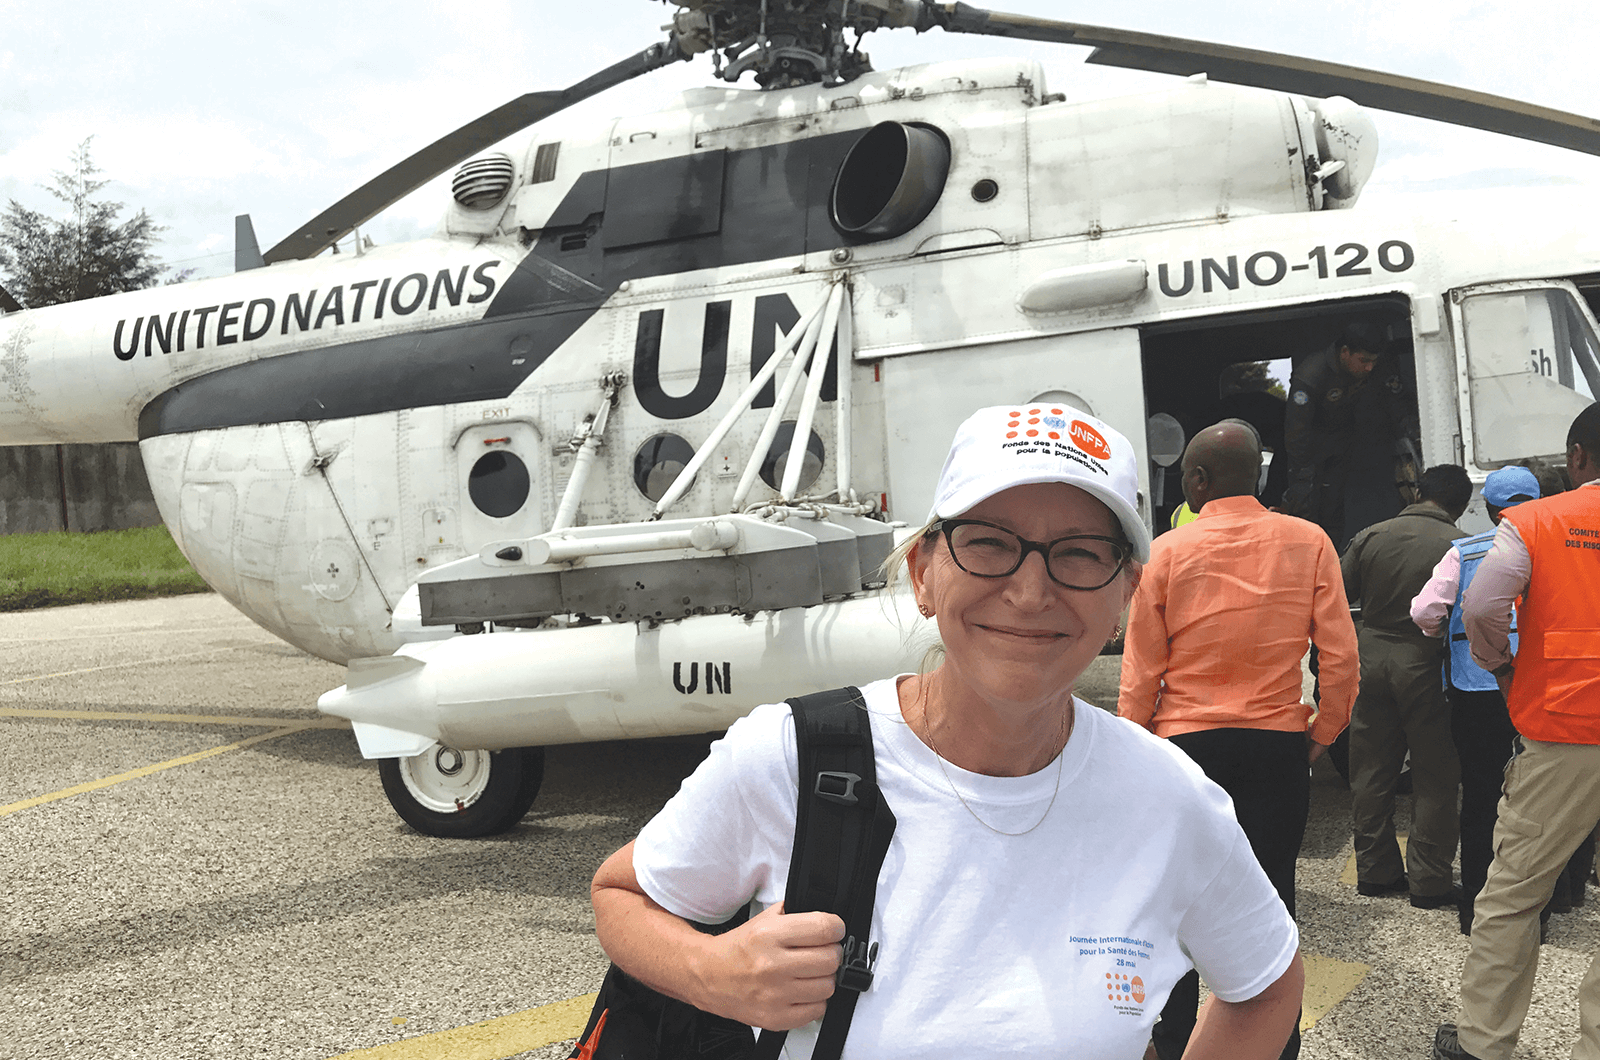 Marielle Sander boards a United Nations helicopter during her work in Haiti.